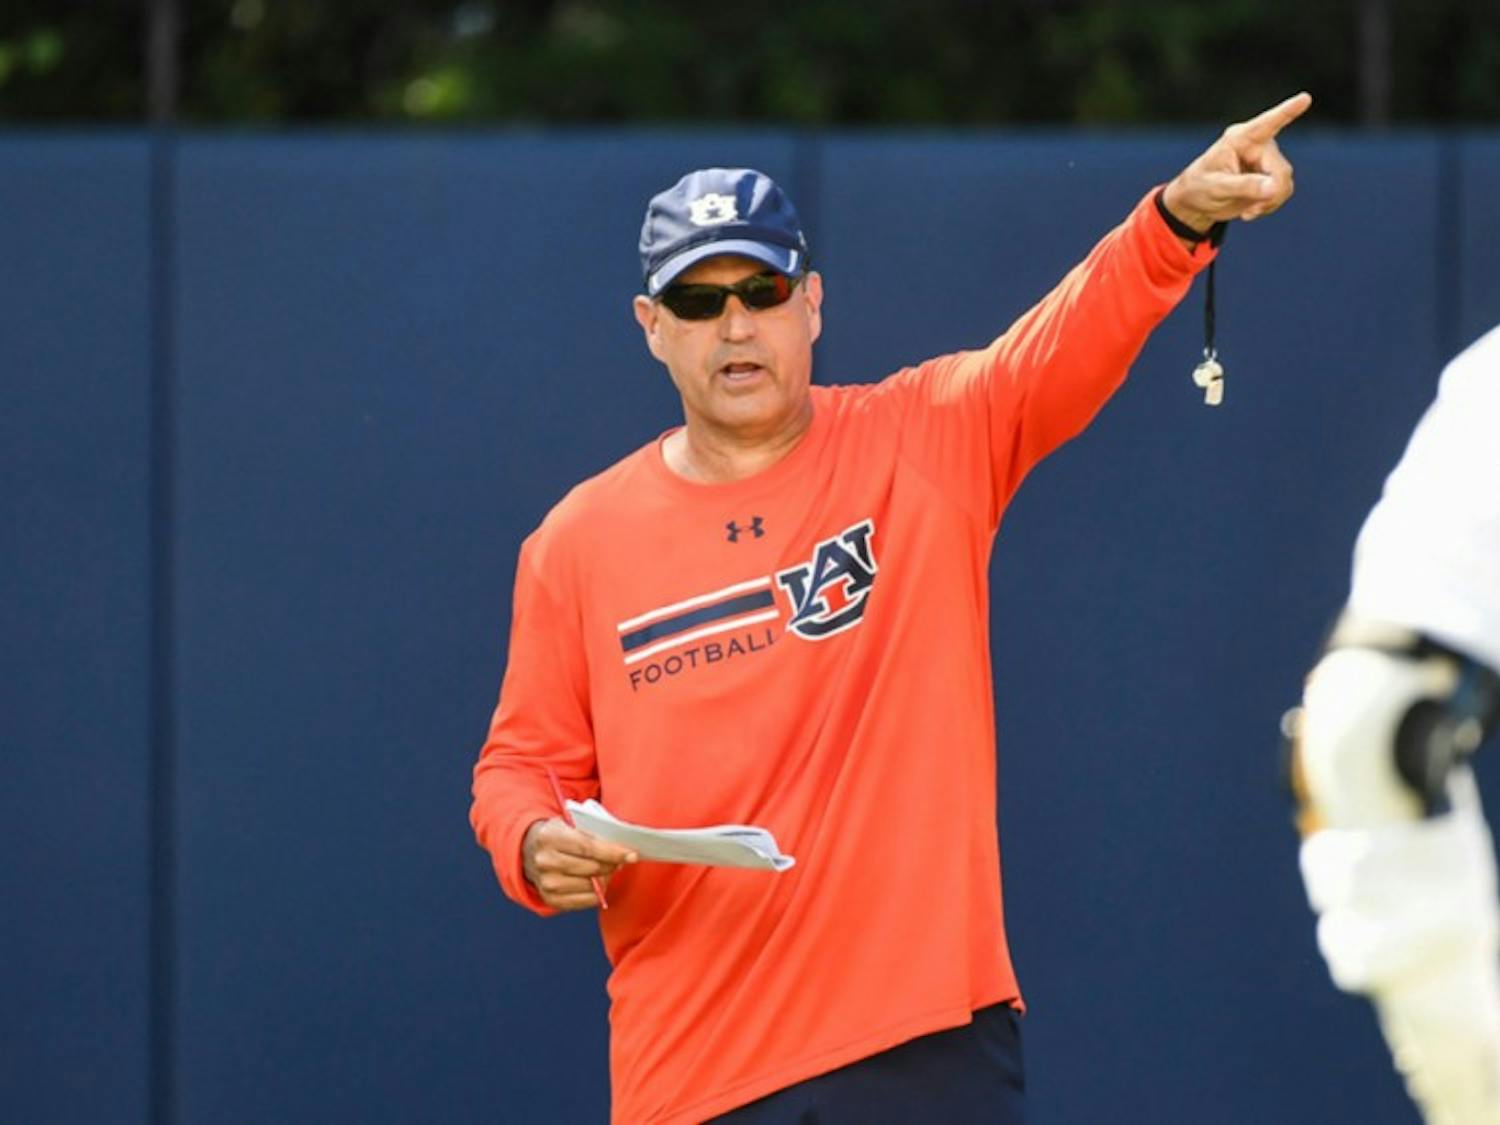 Kevin Steele at practice